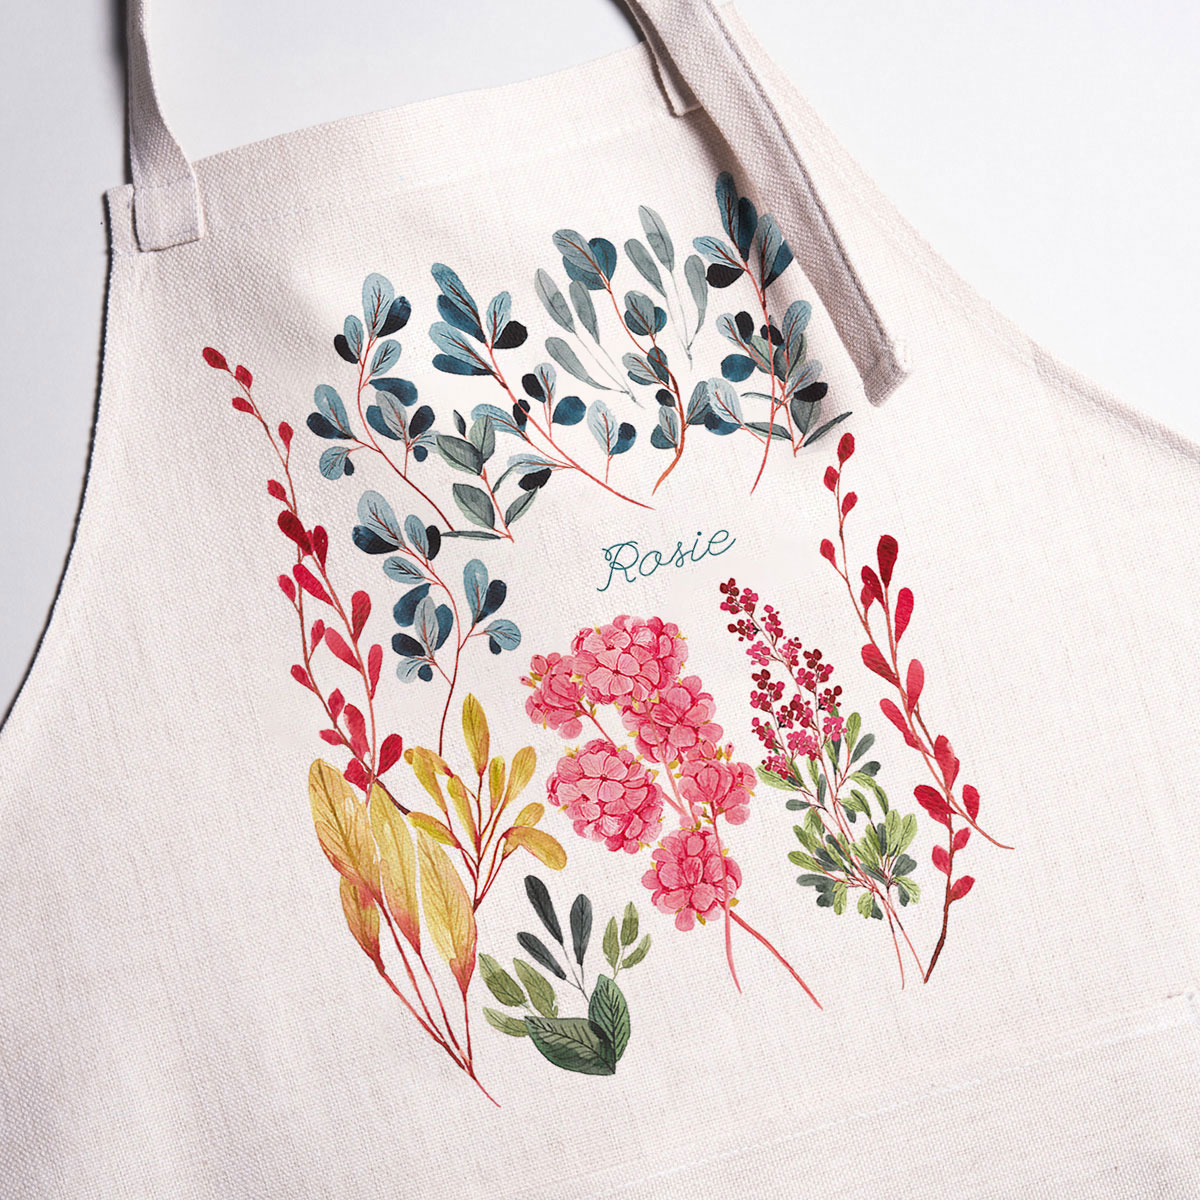 Personalised Apron - Watercolour Floral